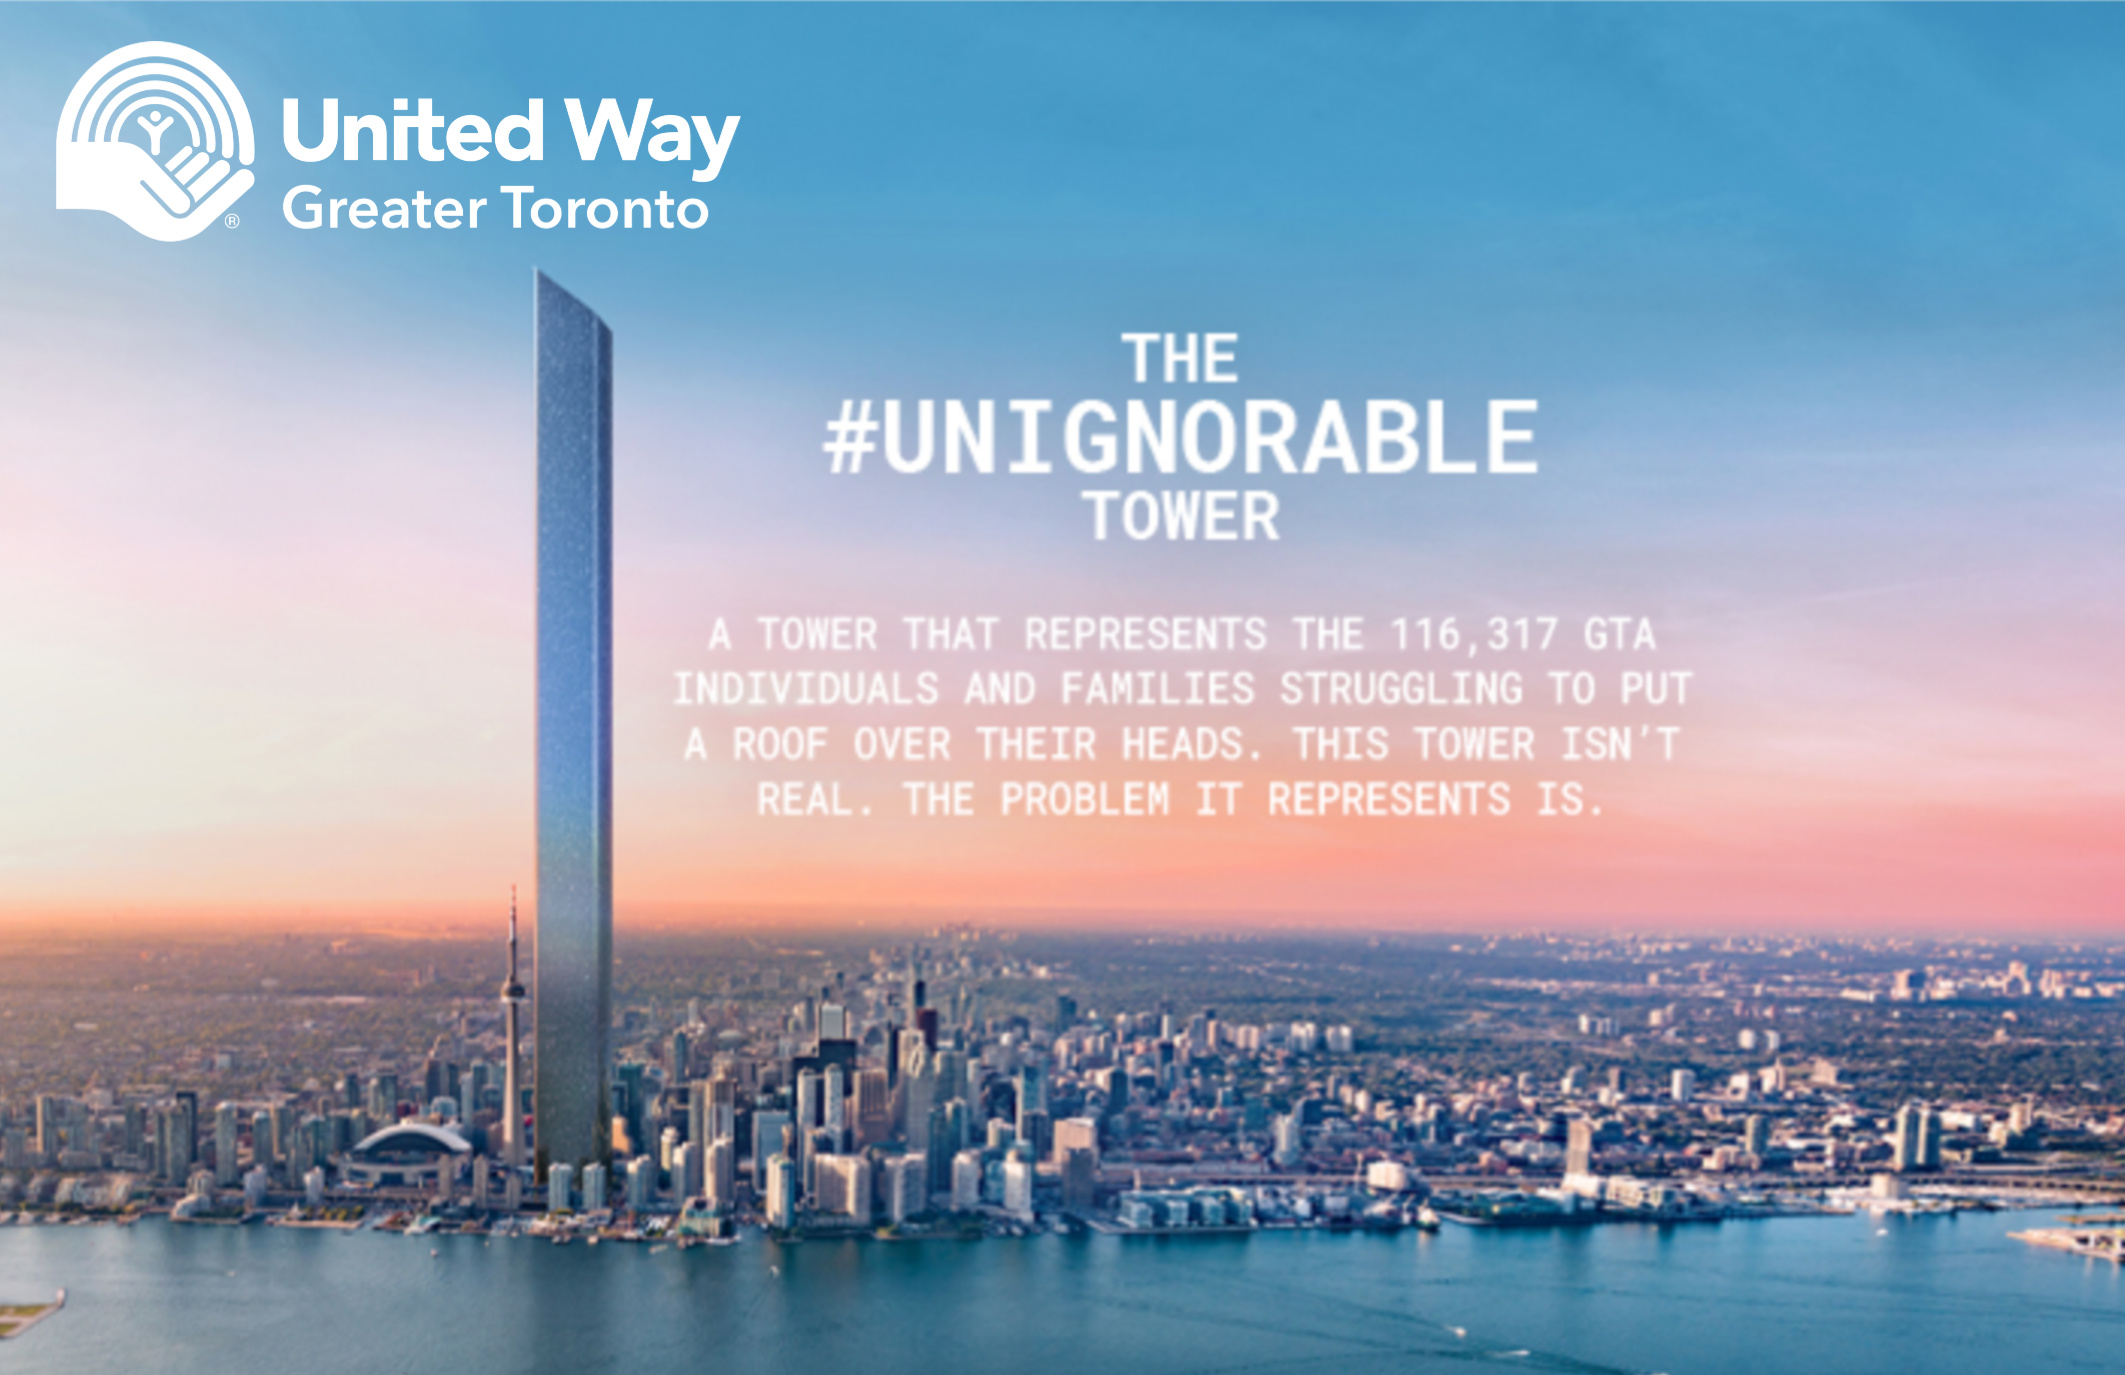 buy a brick and take down the #unignorable tower